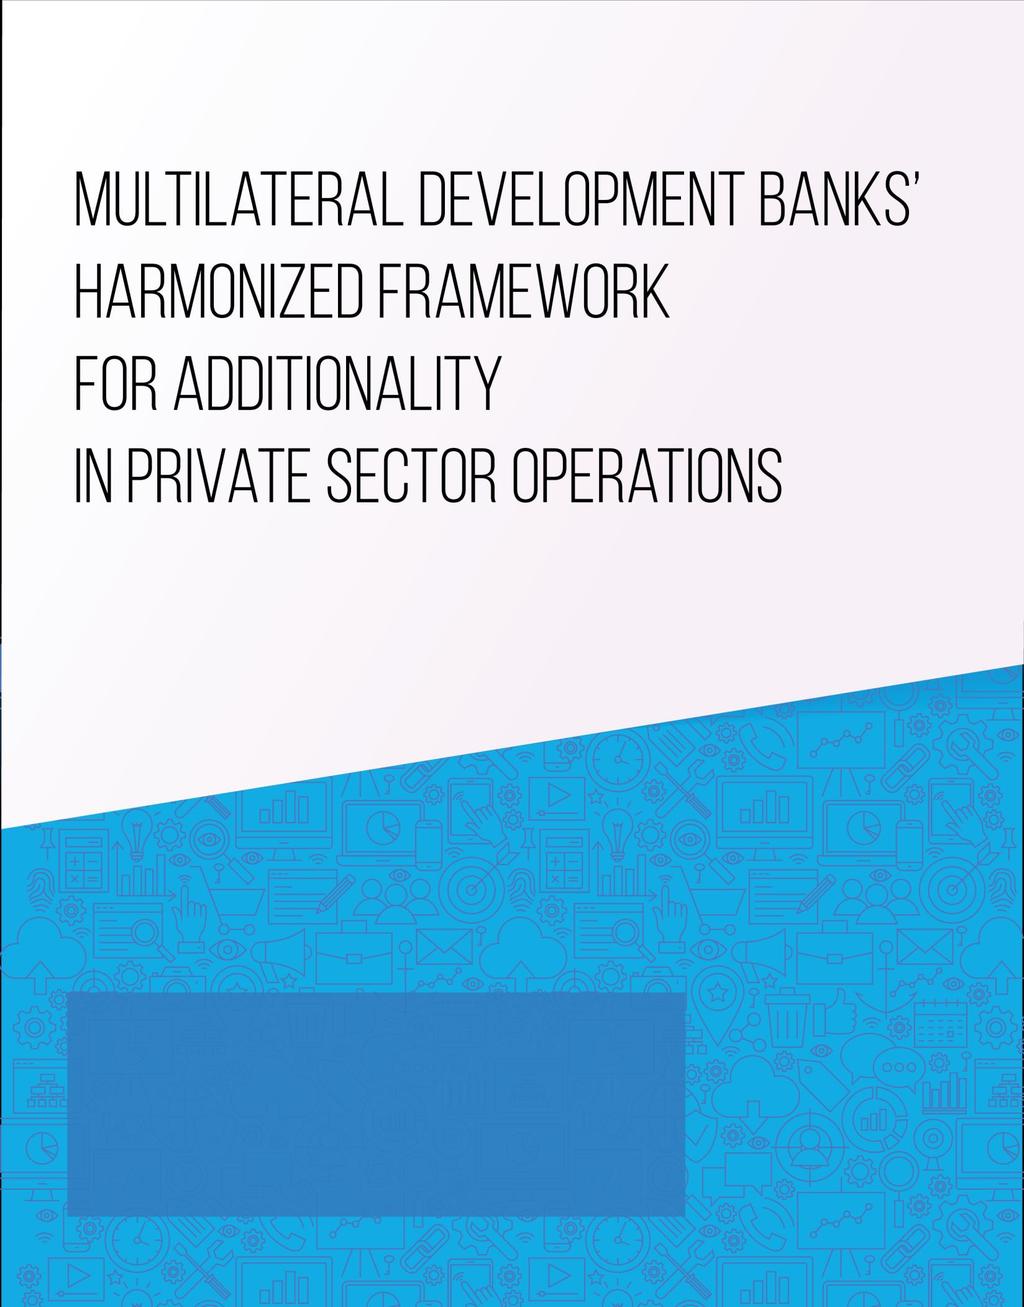 This report was prepared by a group of Multilateral Development Banks (MDBs), composed of the African Development Bank (AfDB), the Asian Development Bank (AsDB), the Asia Infrastructure Investment